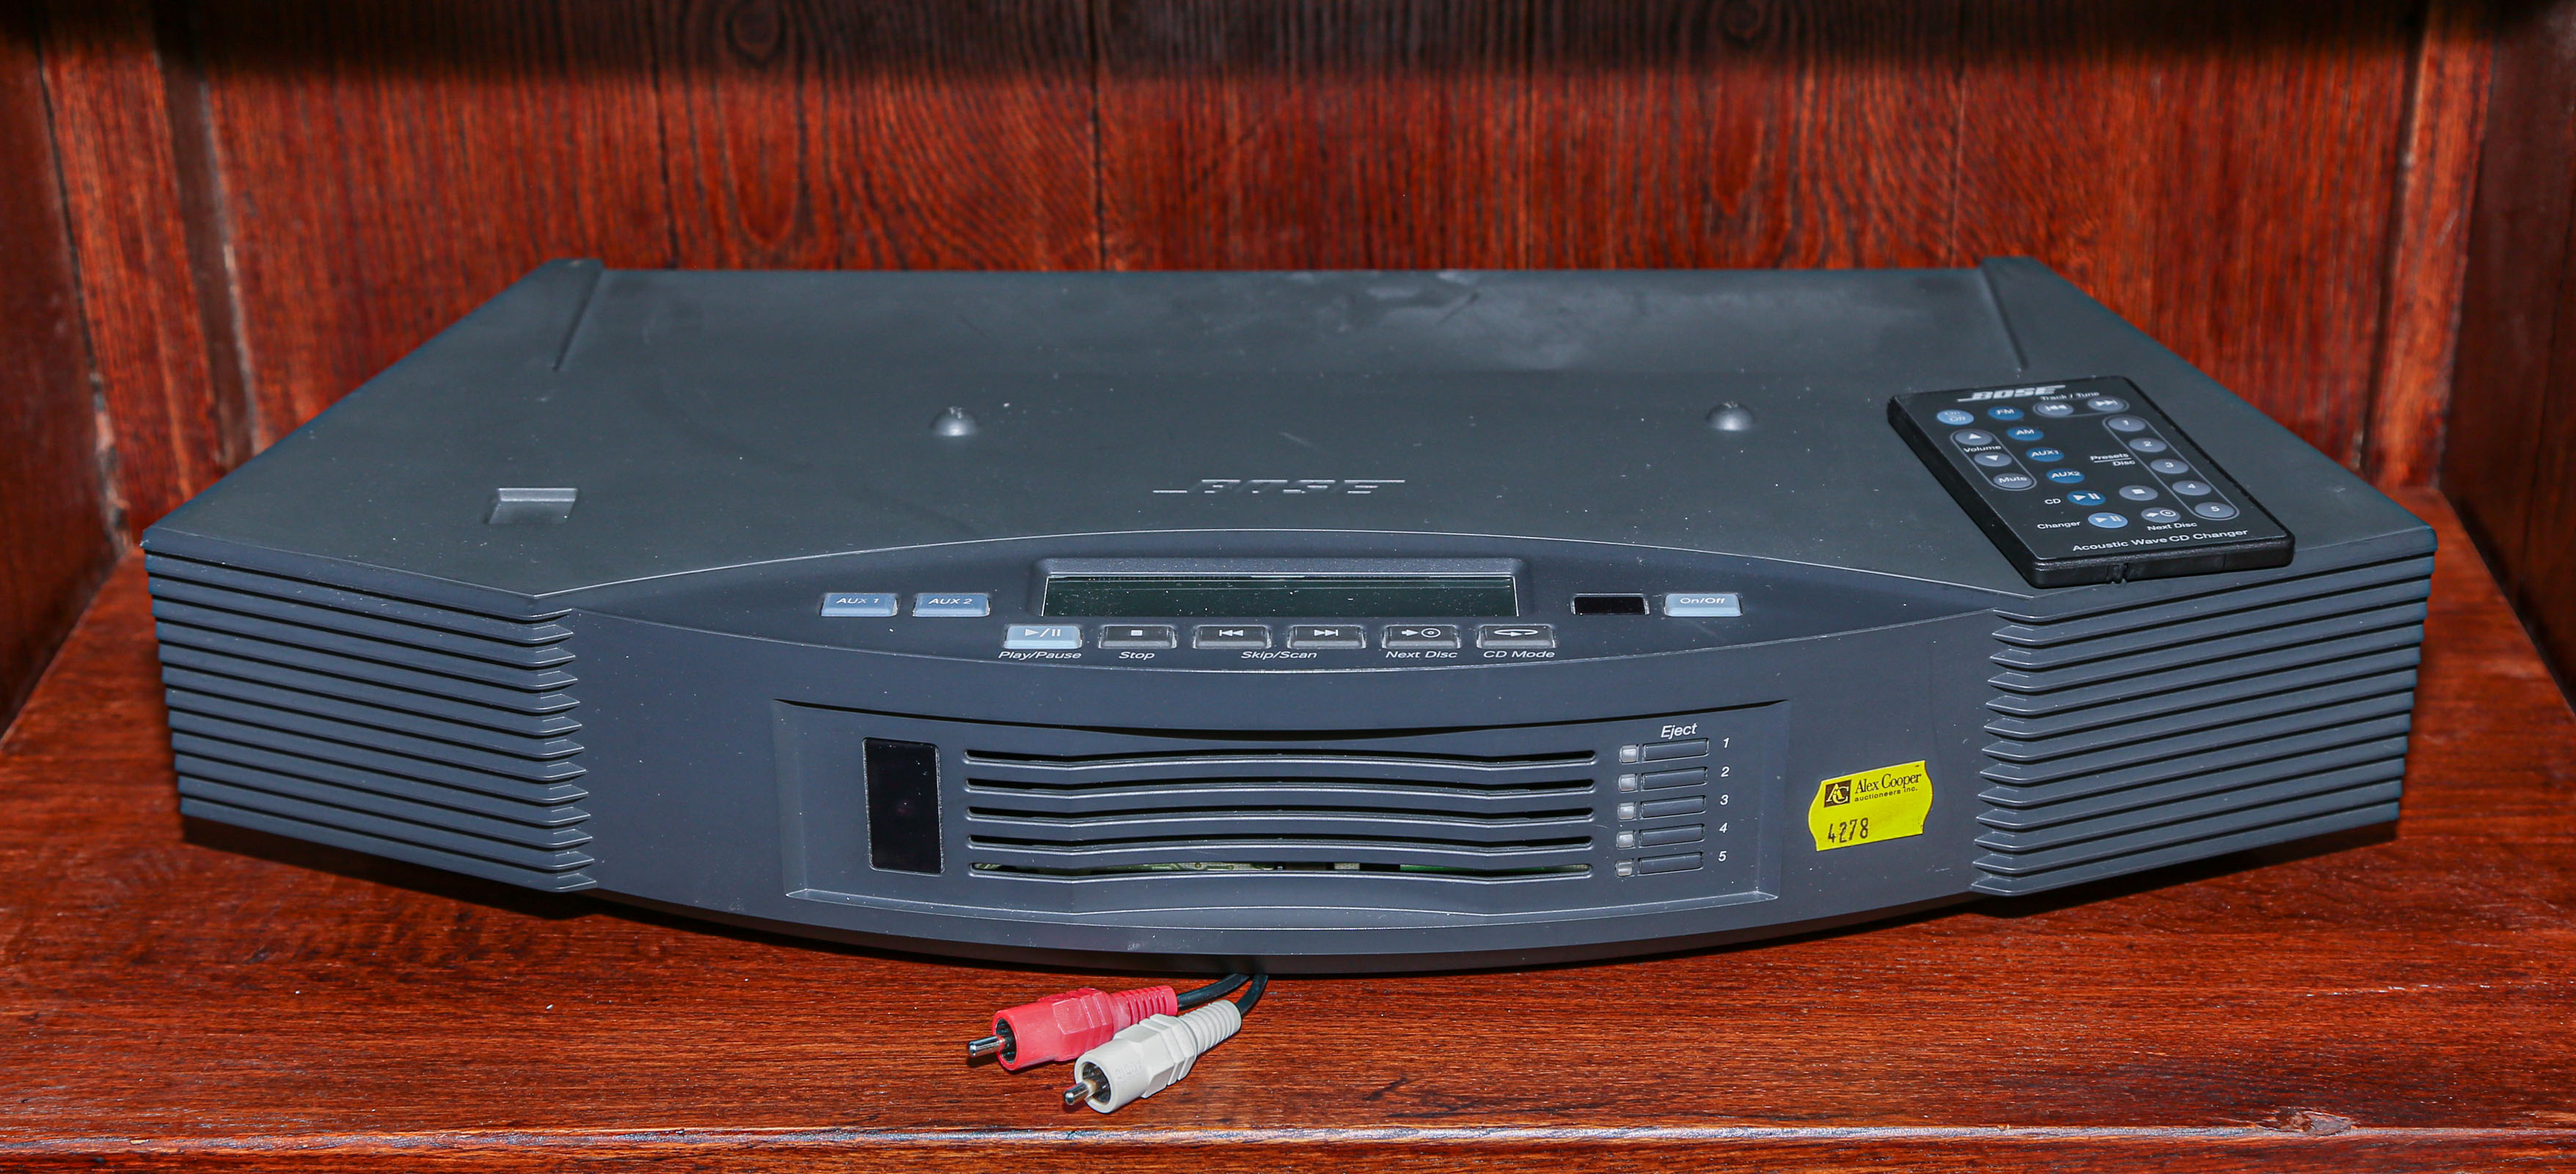 BOSE CD CHANGER WITH REMOTE  2e8c35